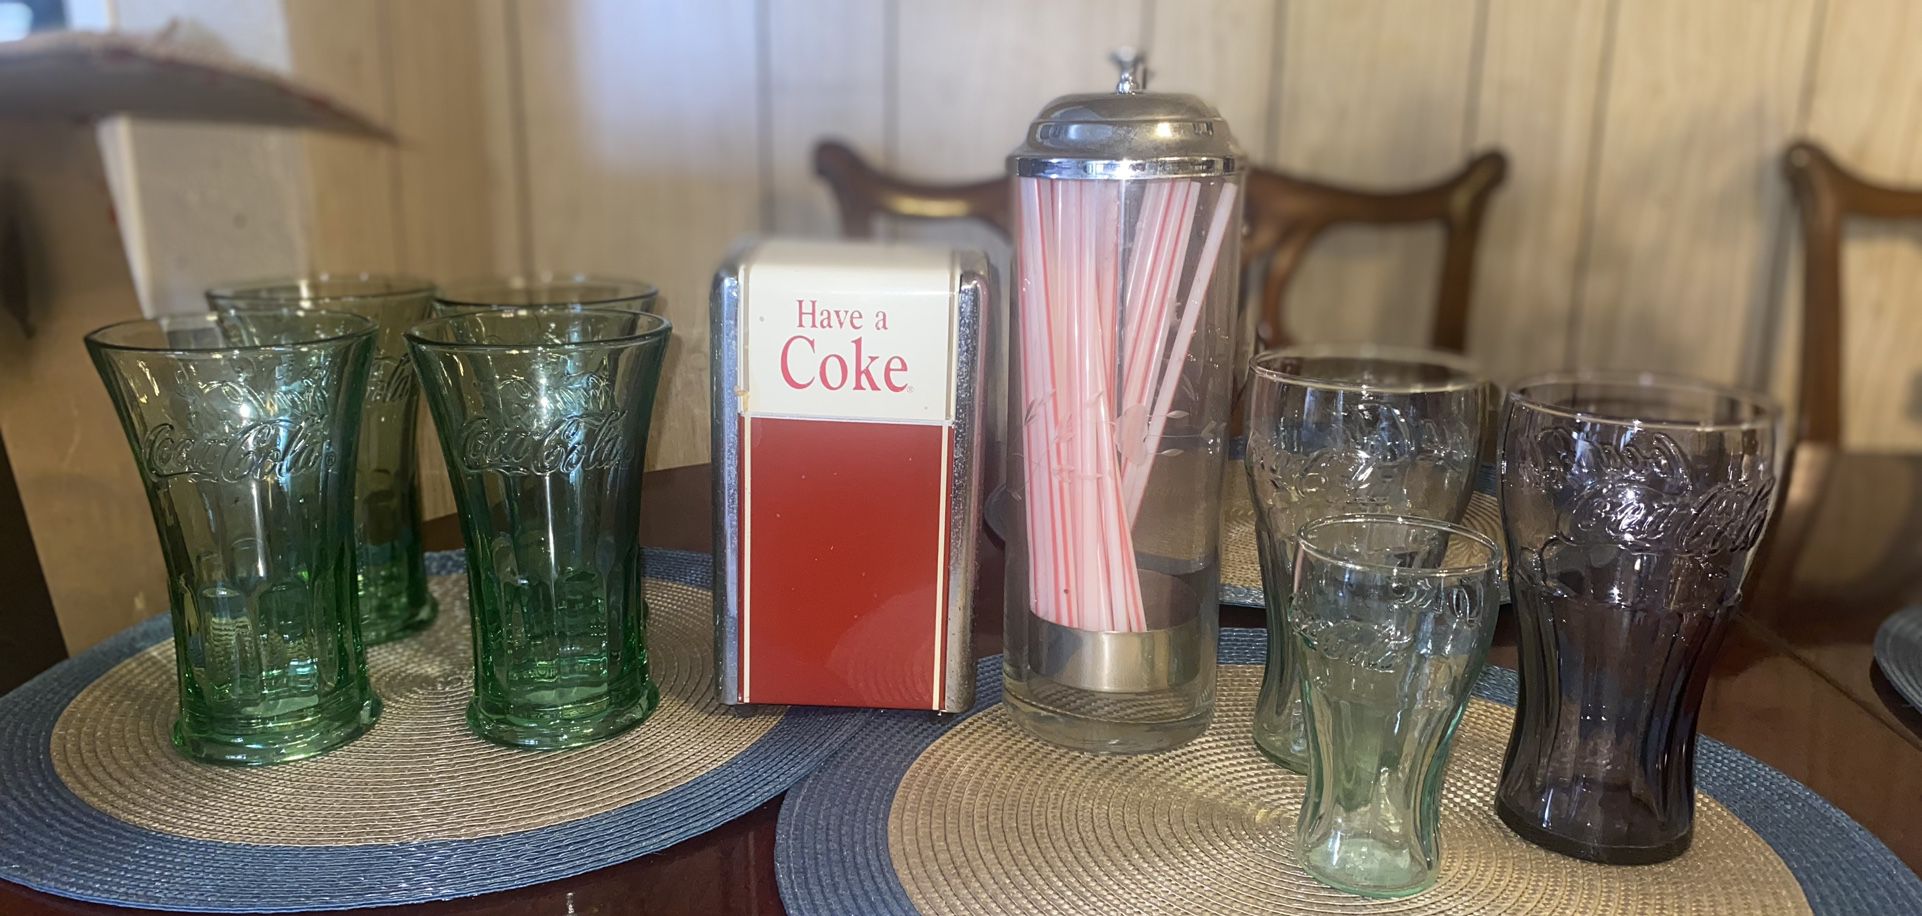 Take Off For $40. The Container Glass Is Print House With The Straws.